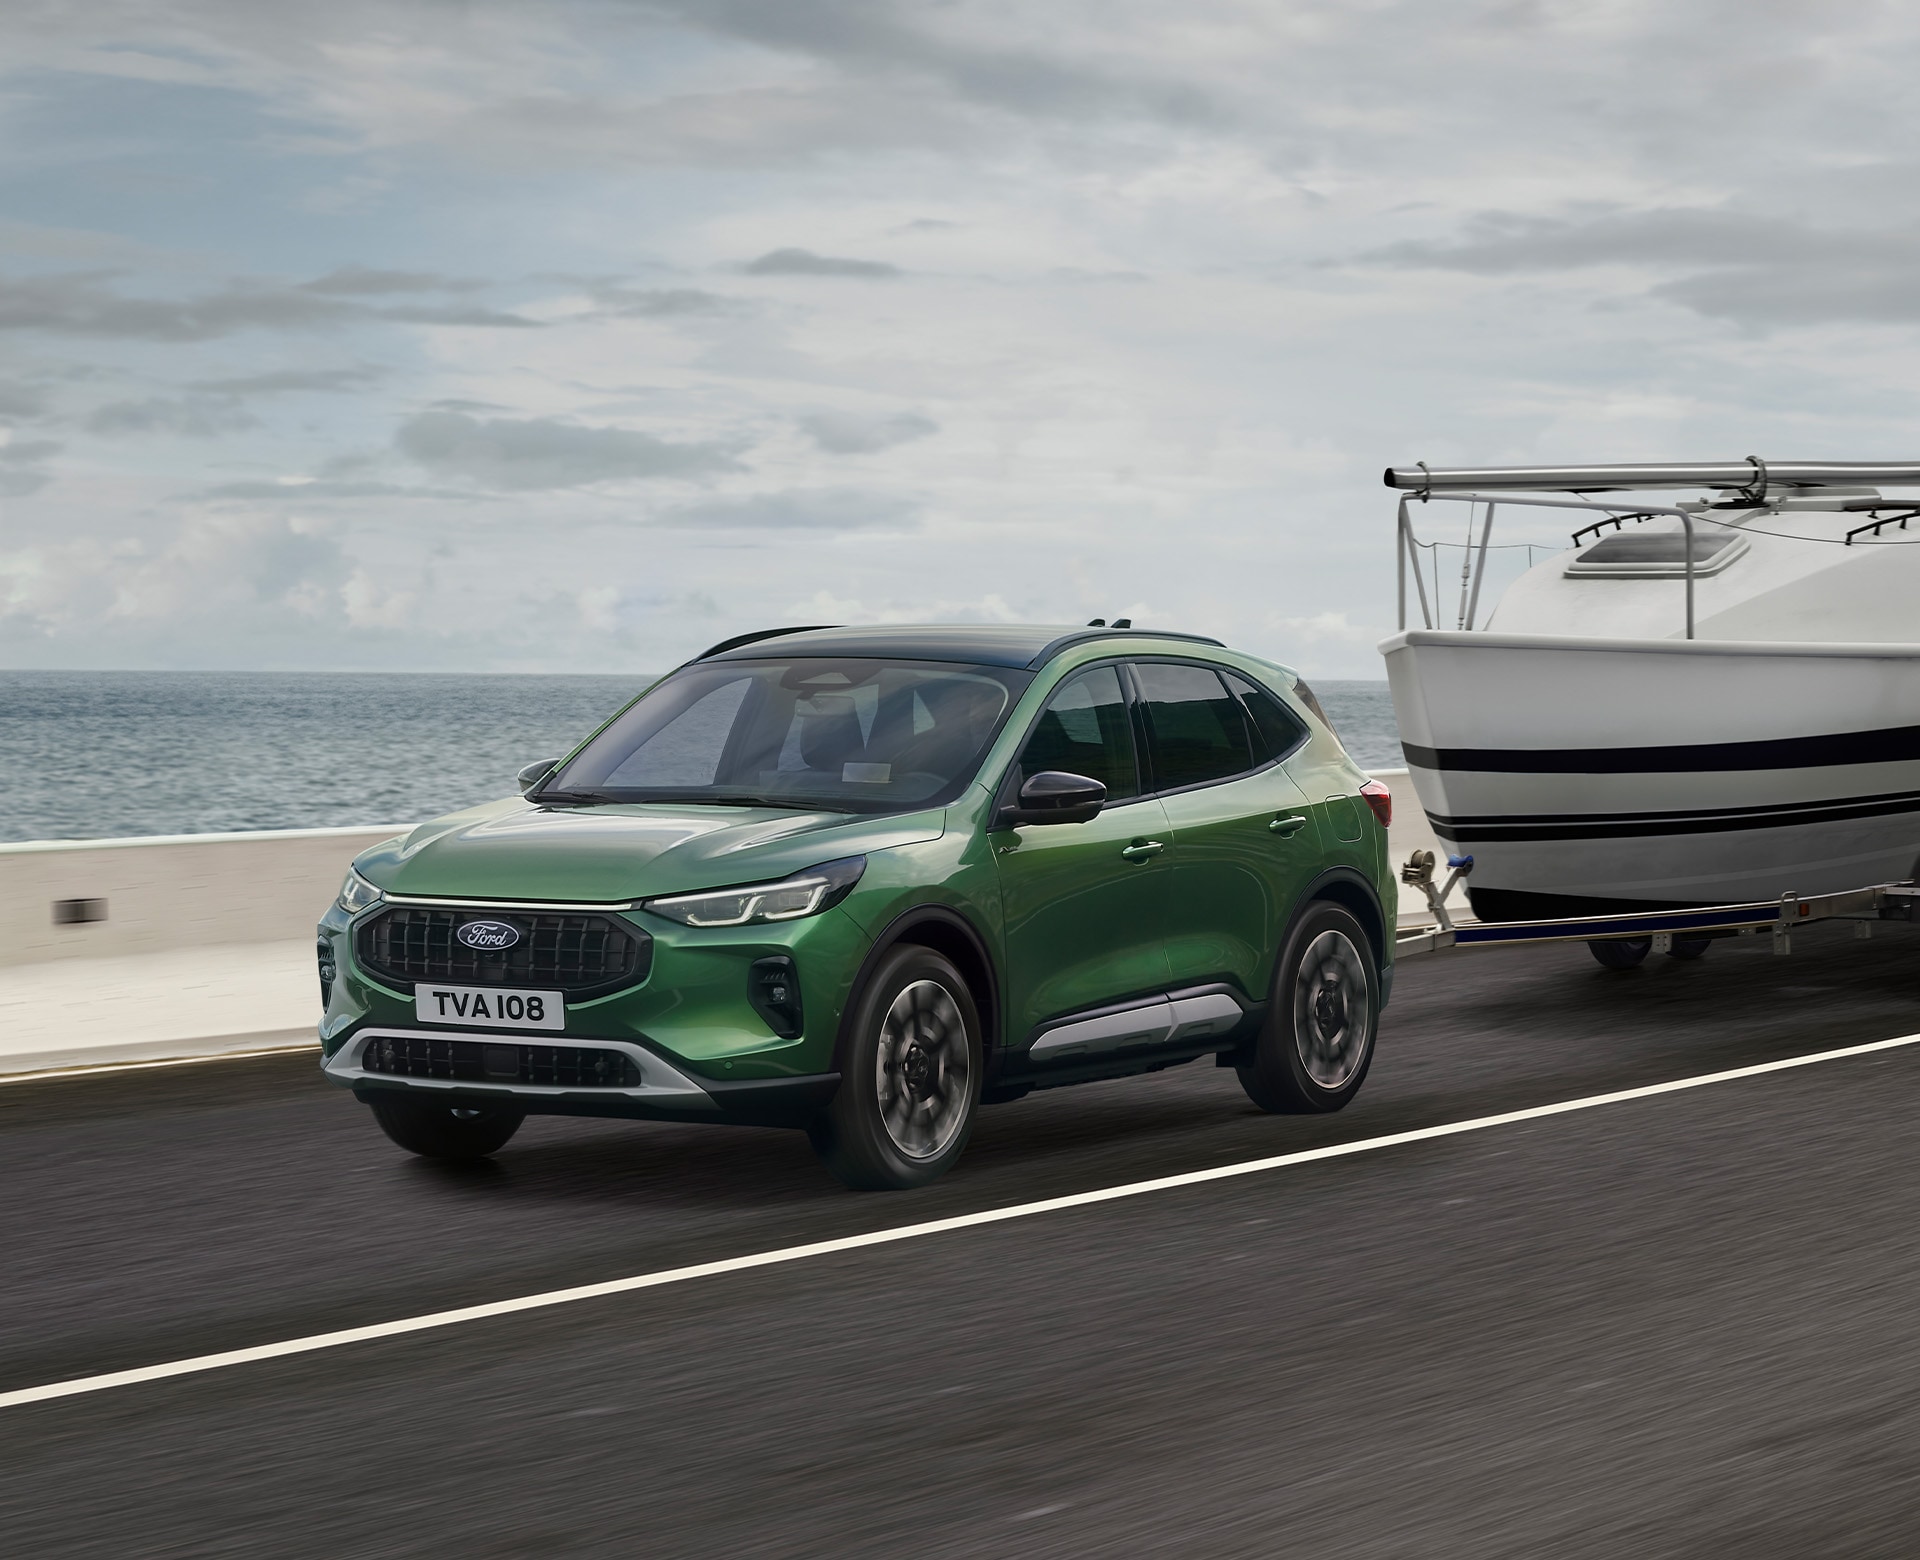 New Ford Kuga towing a boat front view